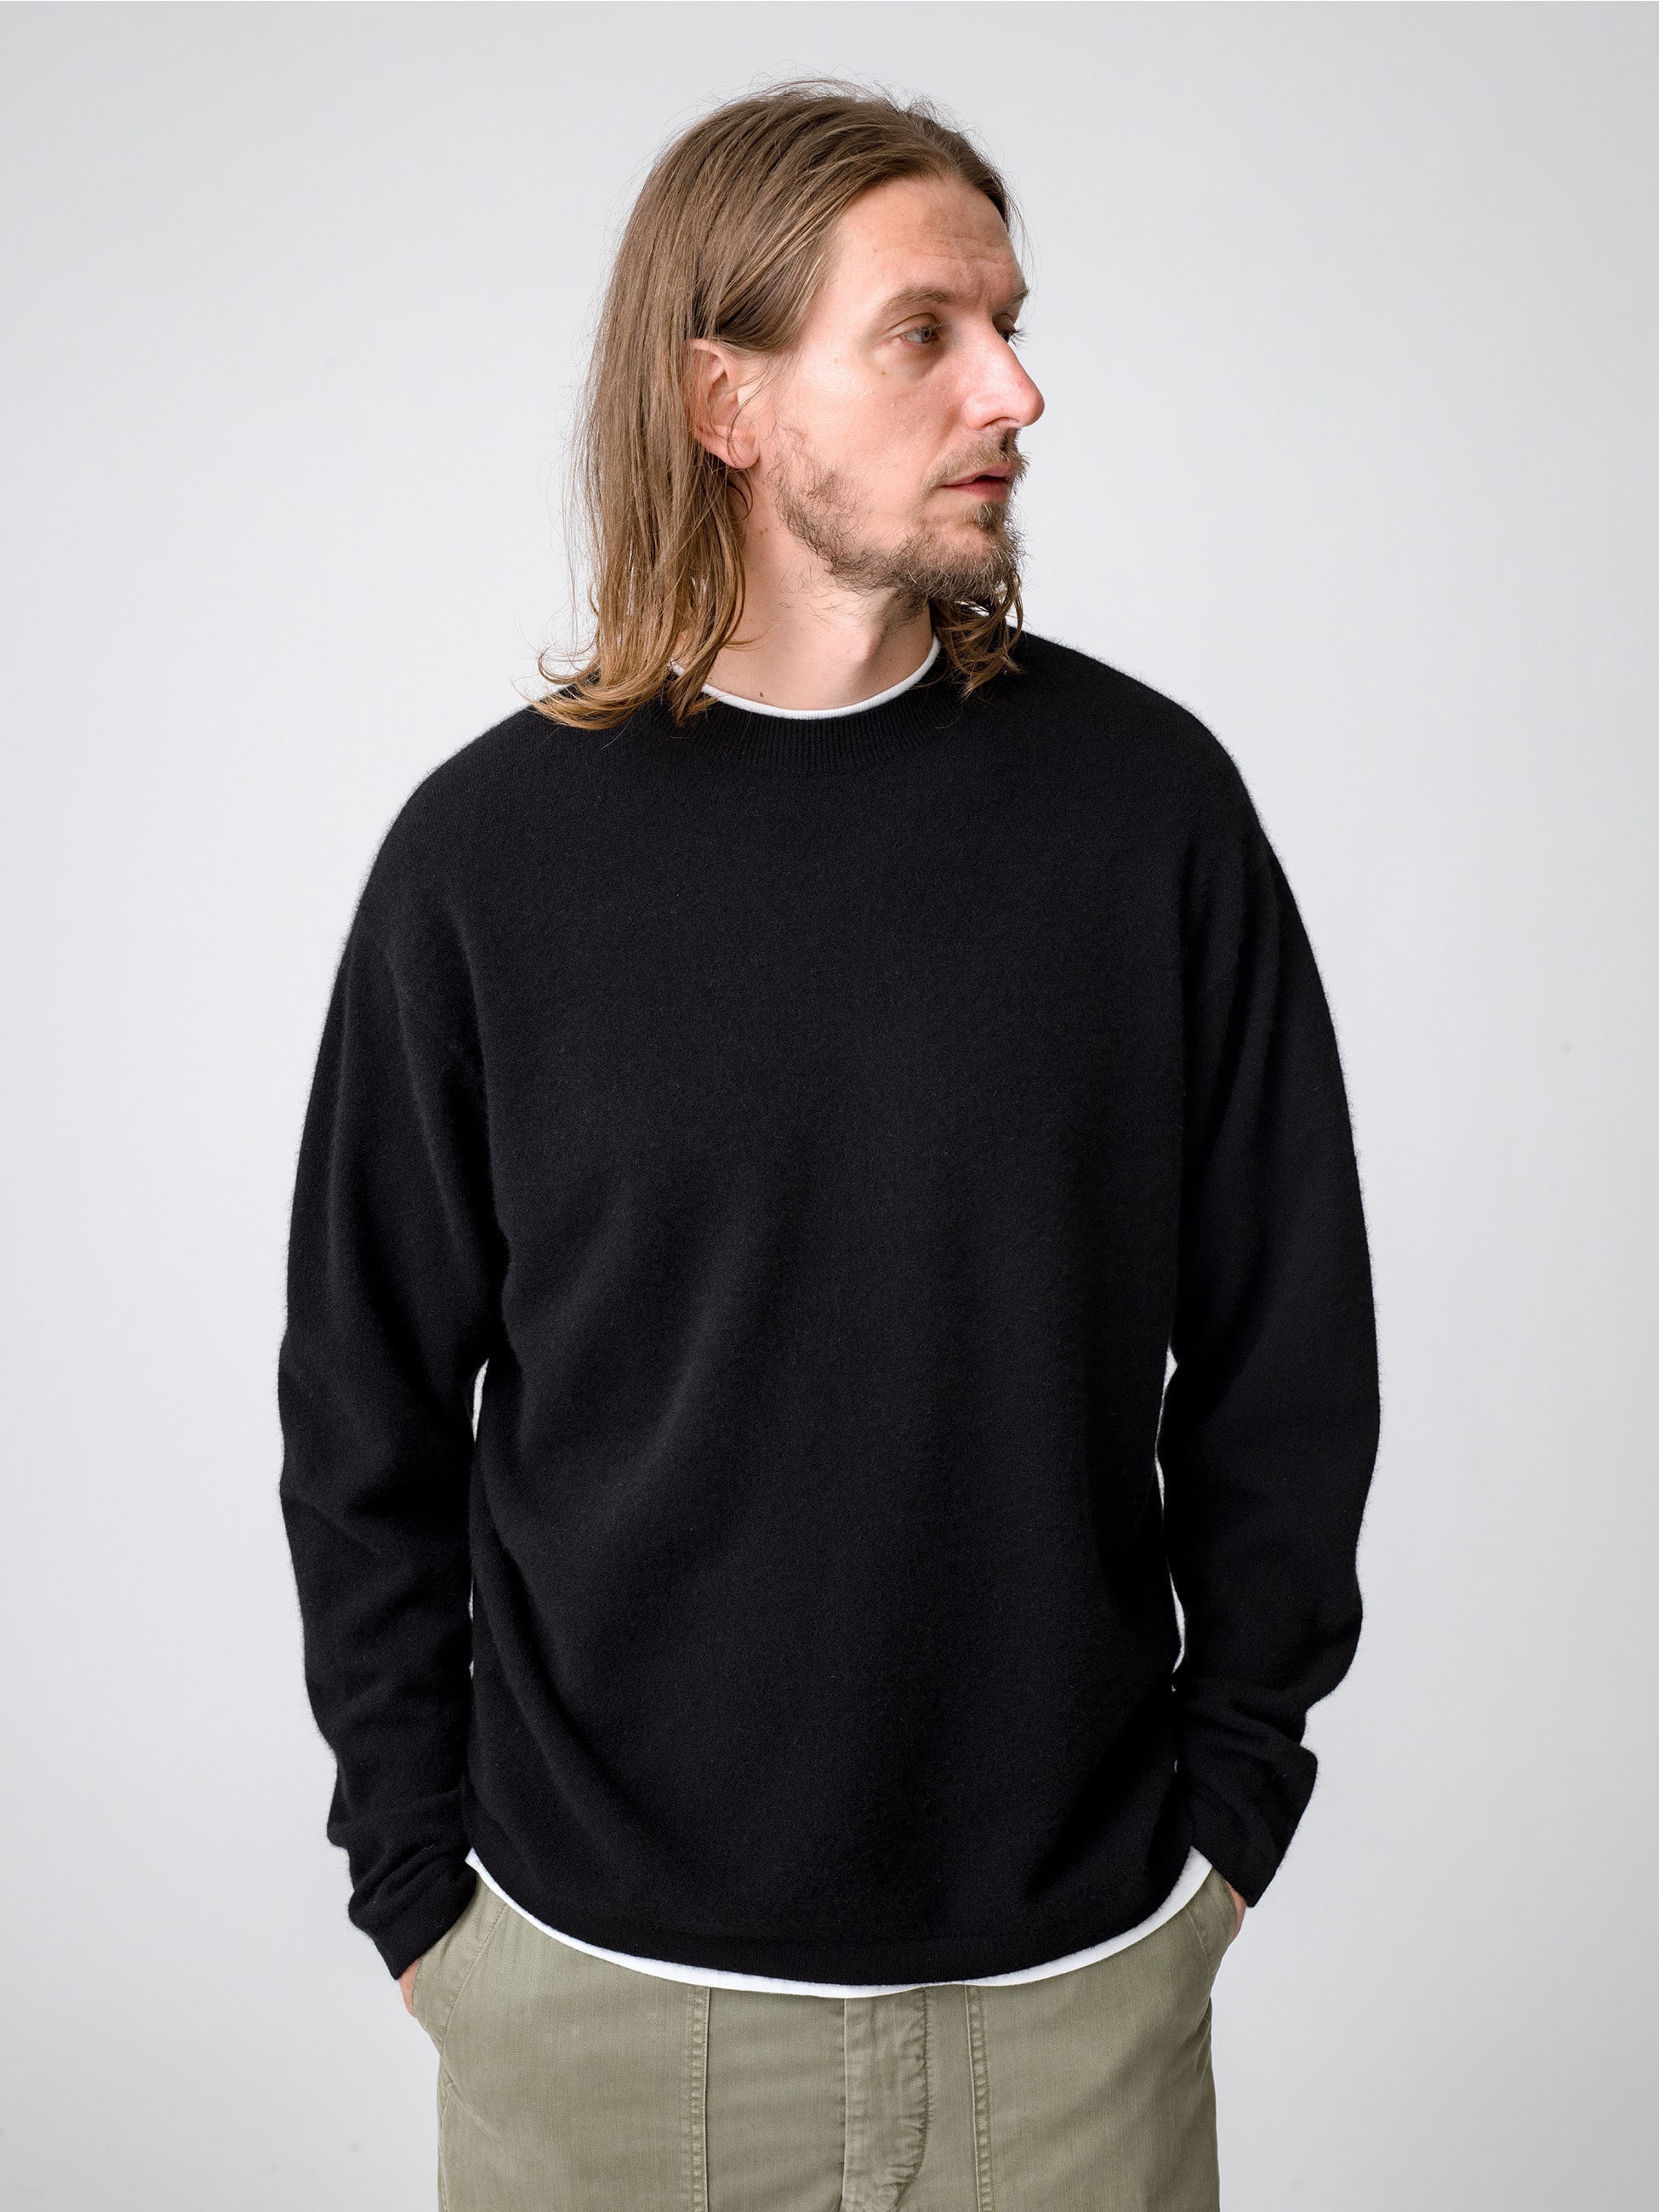 Cashmere Knit Pullover｜Ron Herman(ロンハーマン)｜Ron Herman